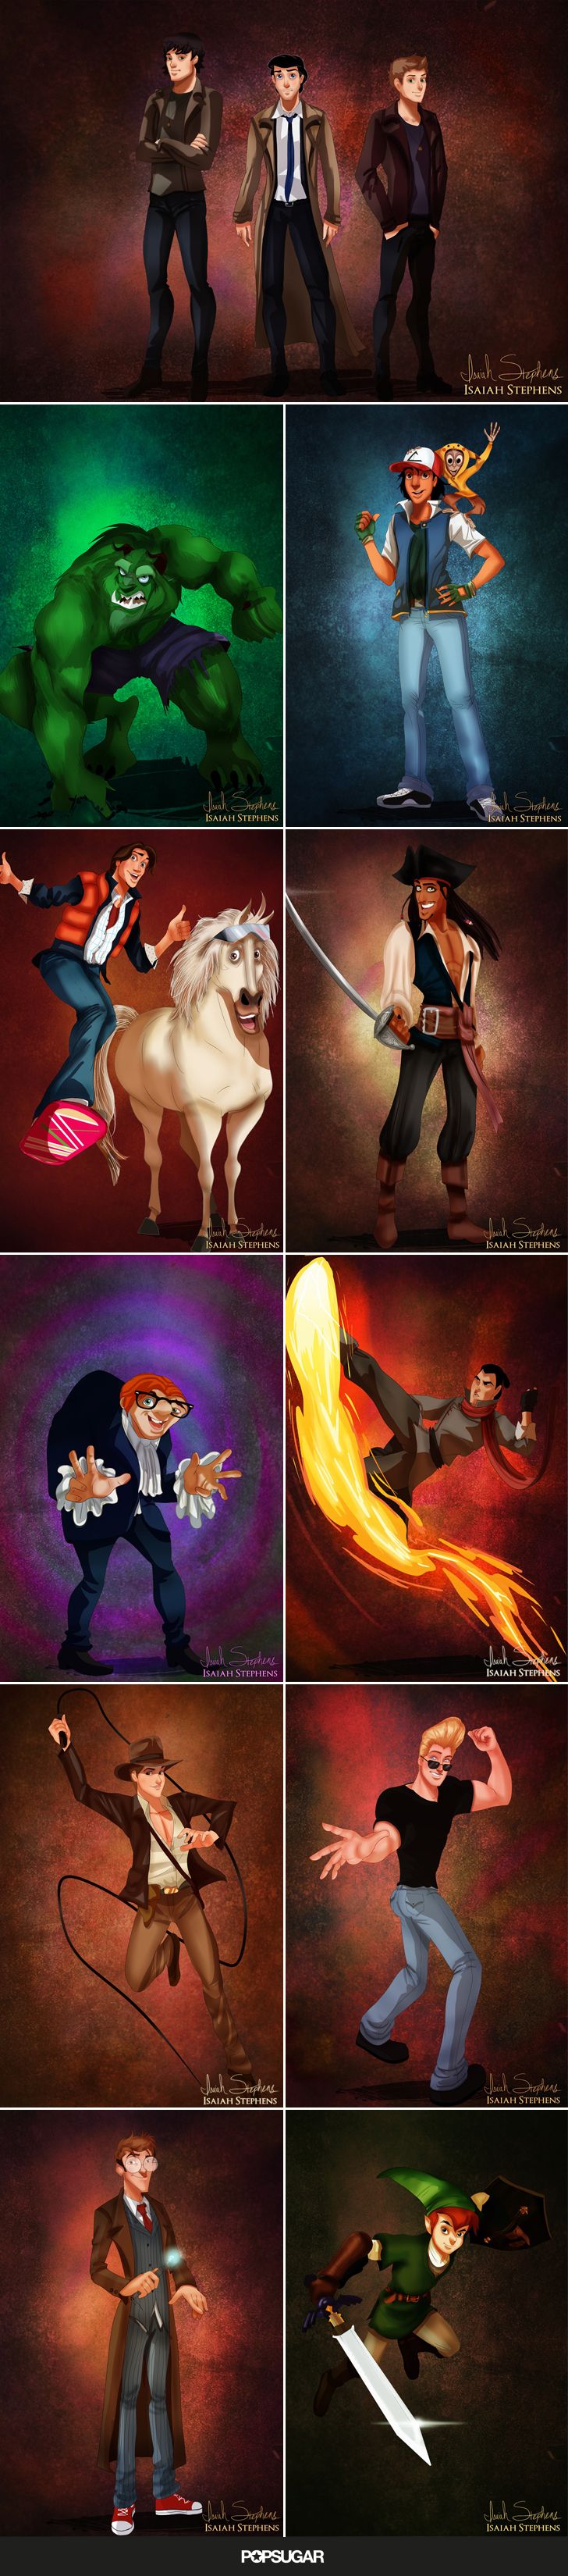 Disney Princes and Princesses Get Pop Culture Makeovers: see Disney characters dressed in Halloween costumes